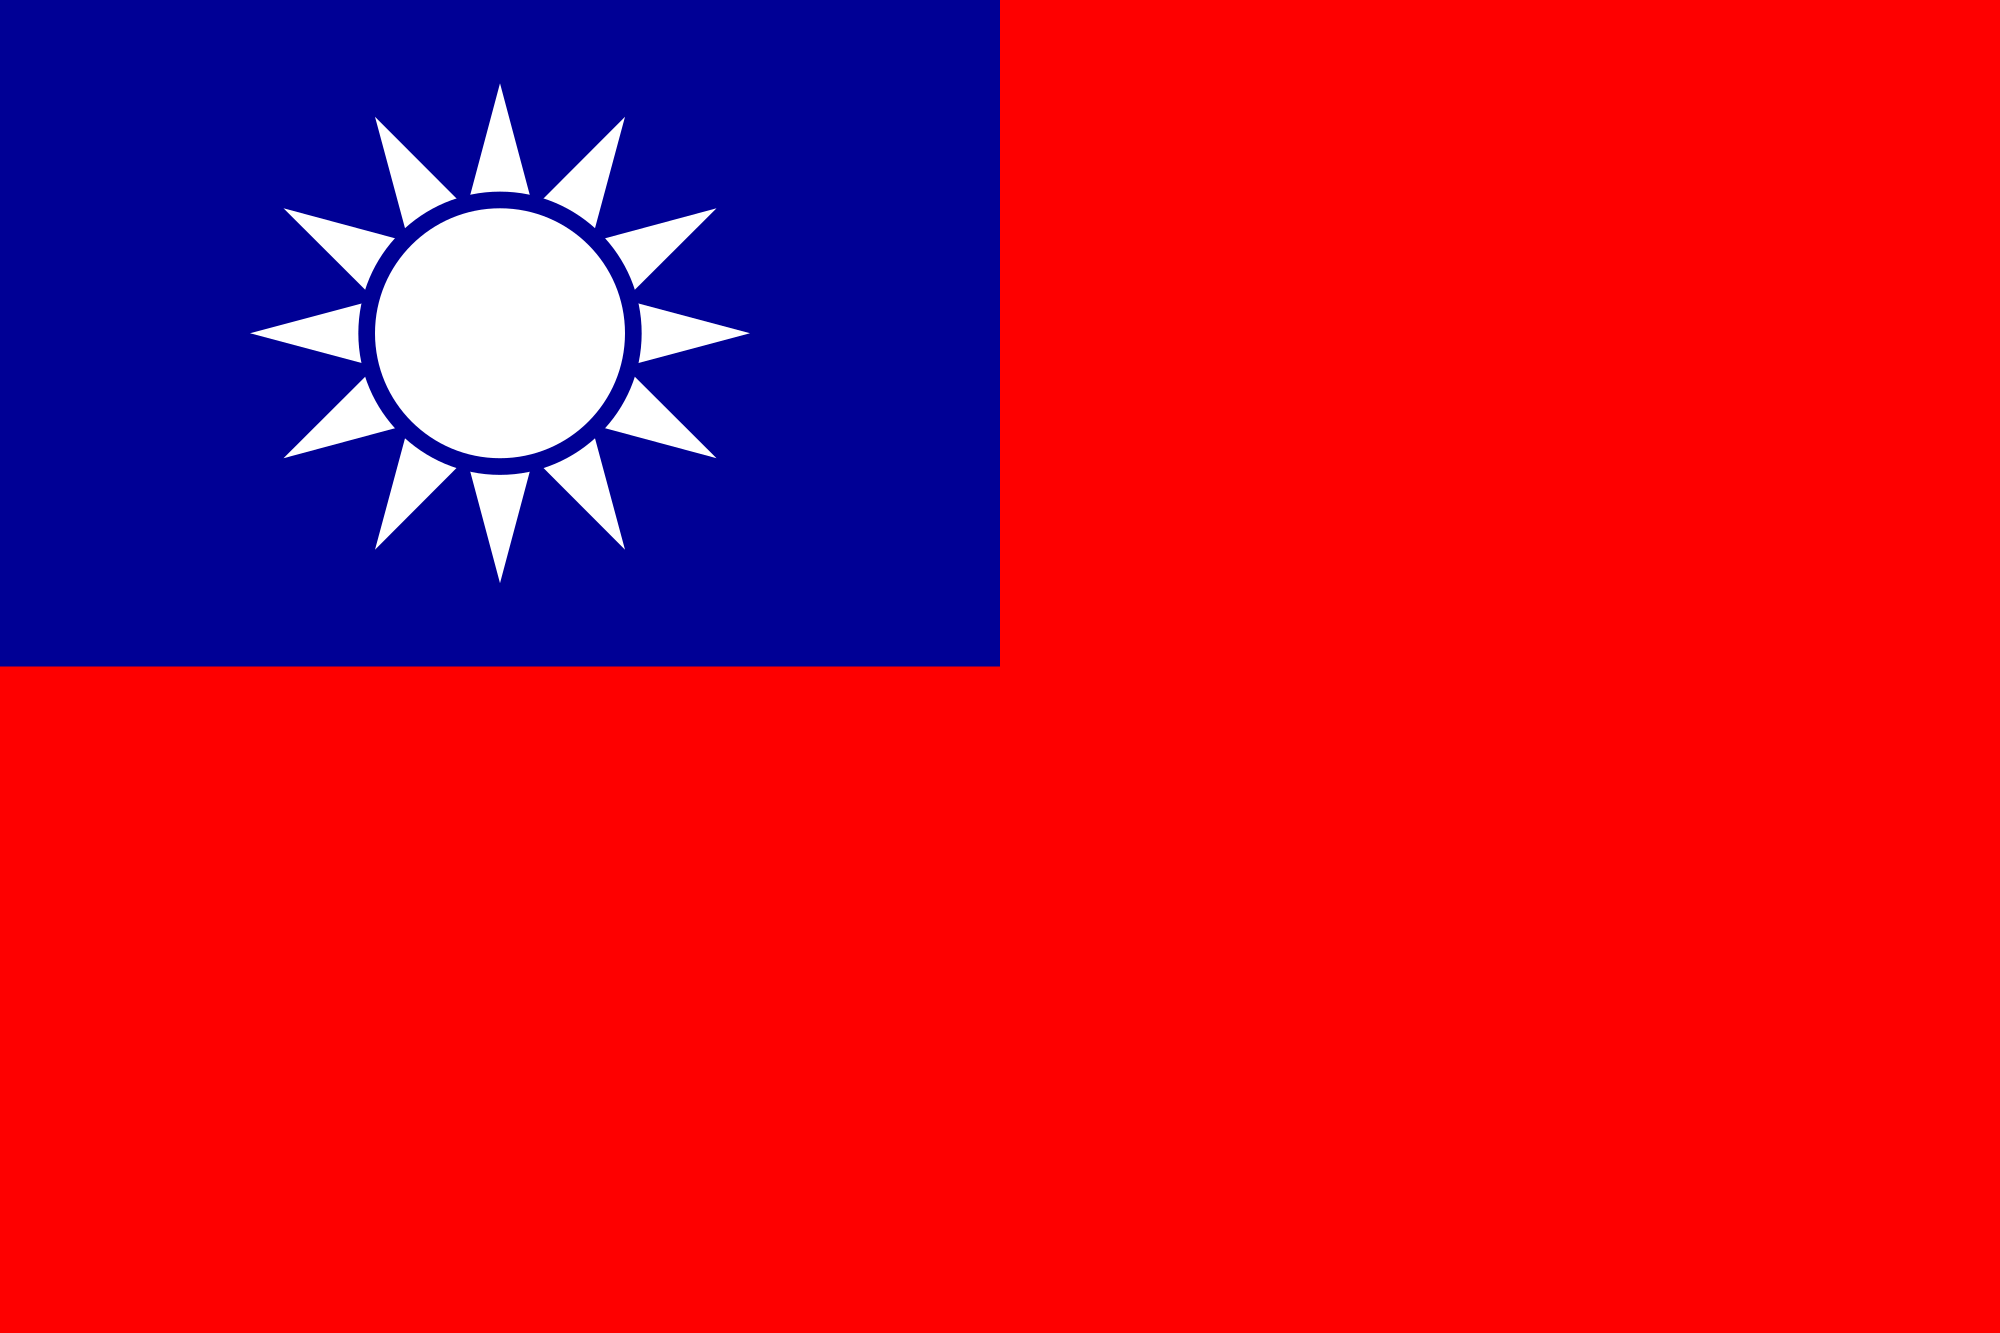 Blue Square White Star Logo - Flag of the Republic of China